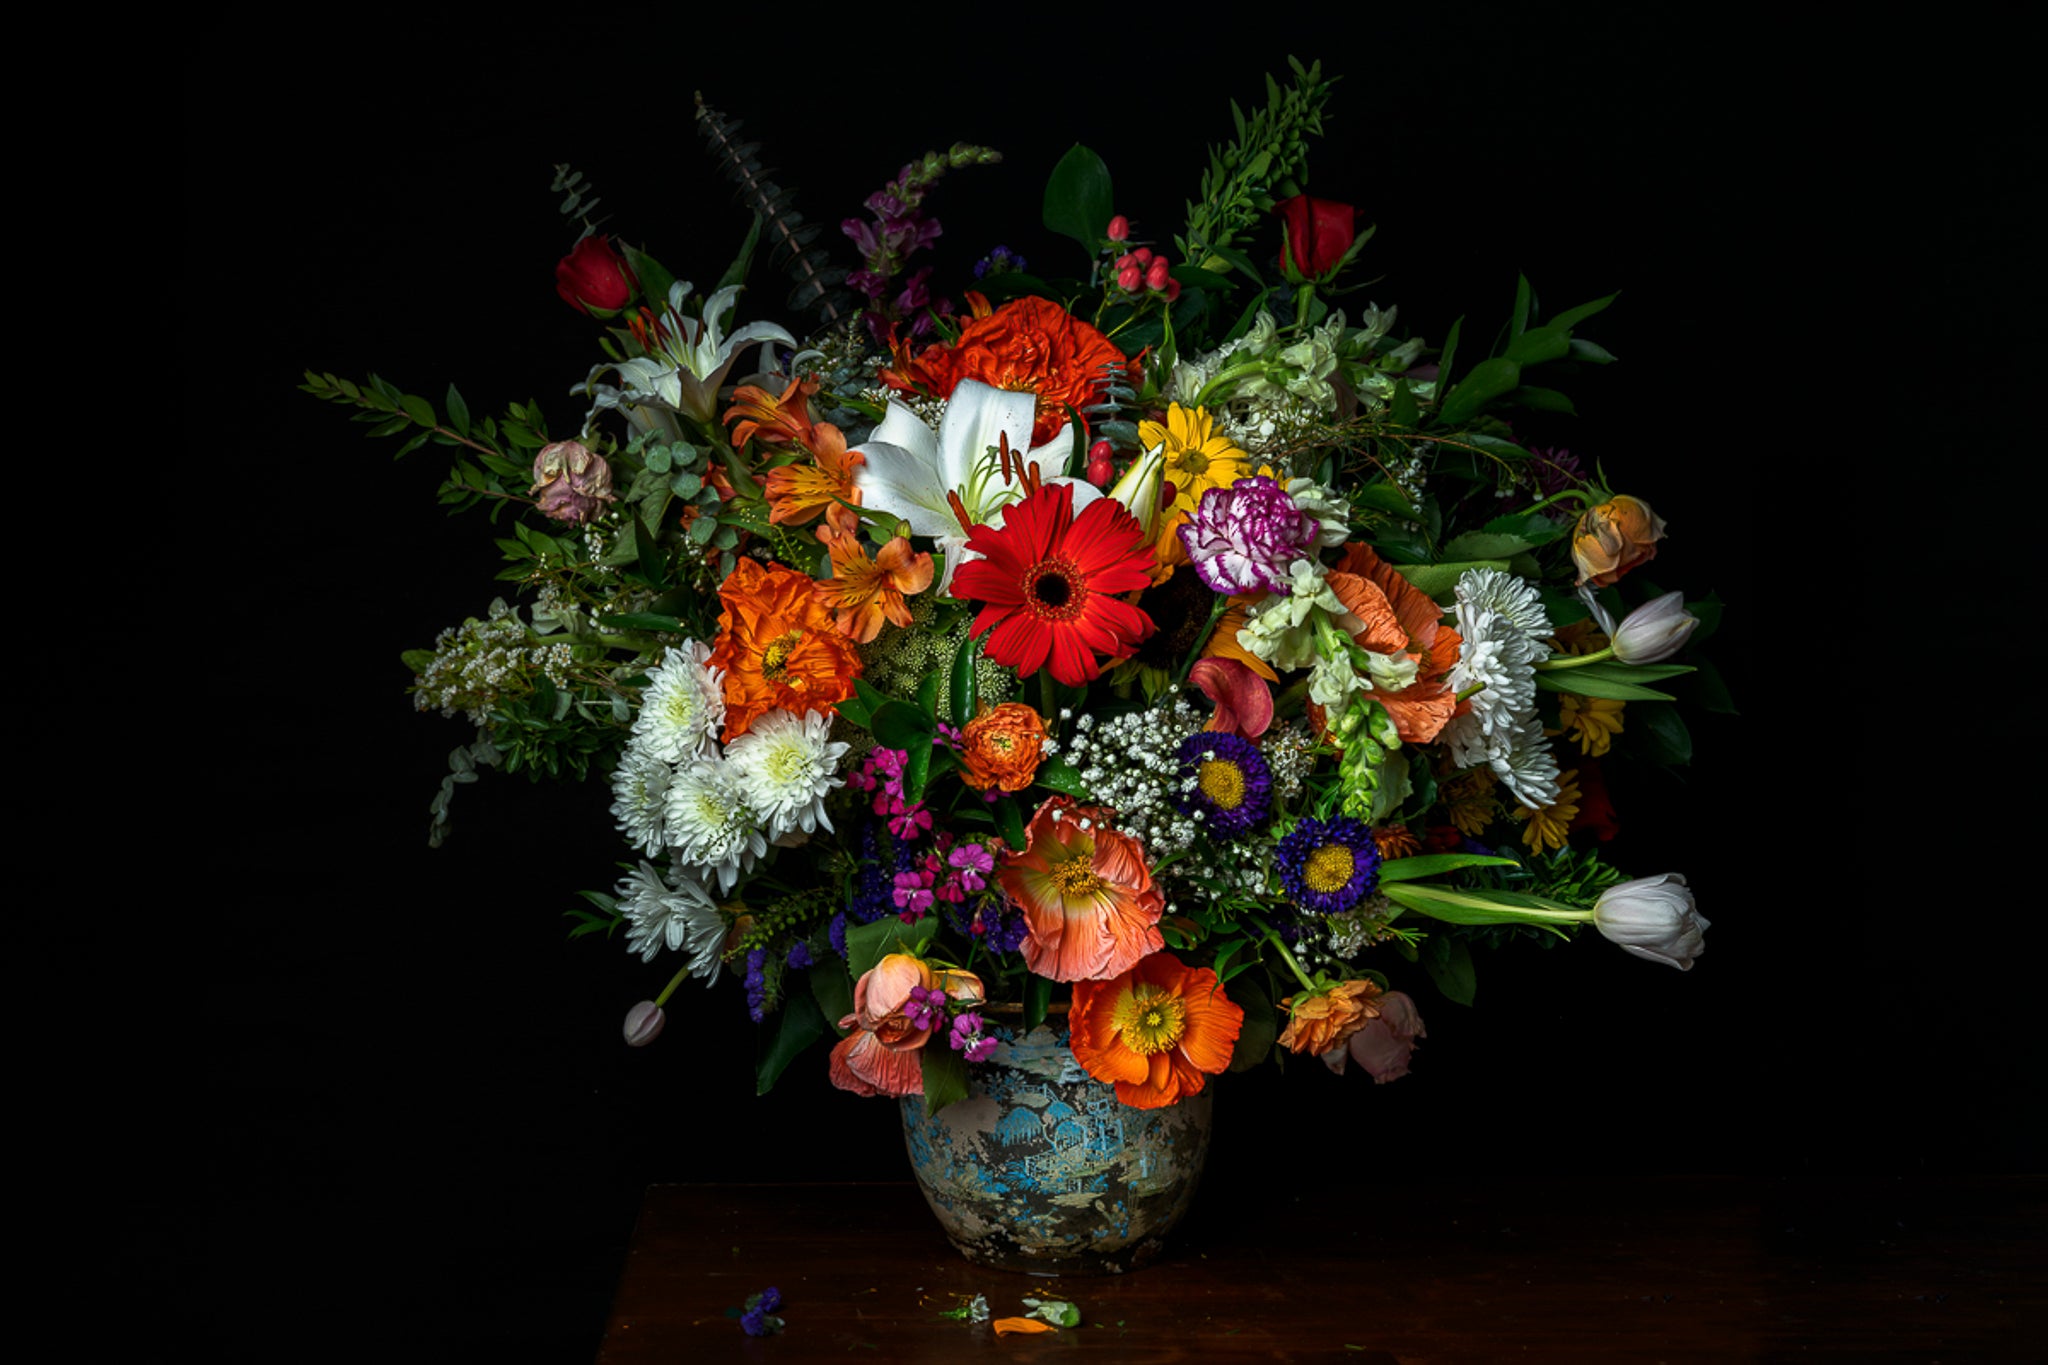 A metal print from Dreaux Fine Art of "A Generous Gift." "Generous Gift" is a photograph of a bouquet of various types of flowers on a black background.